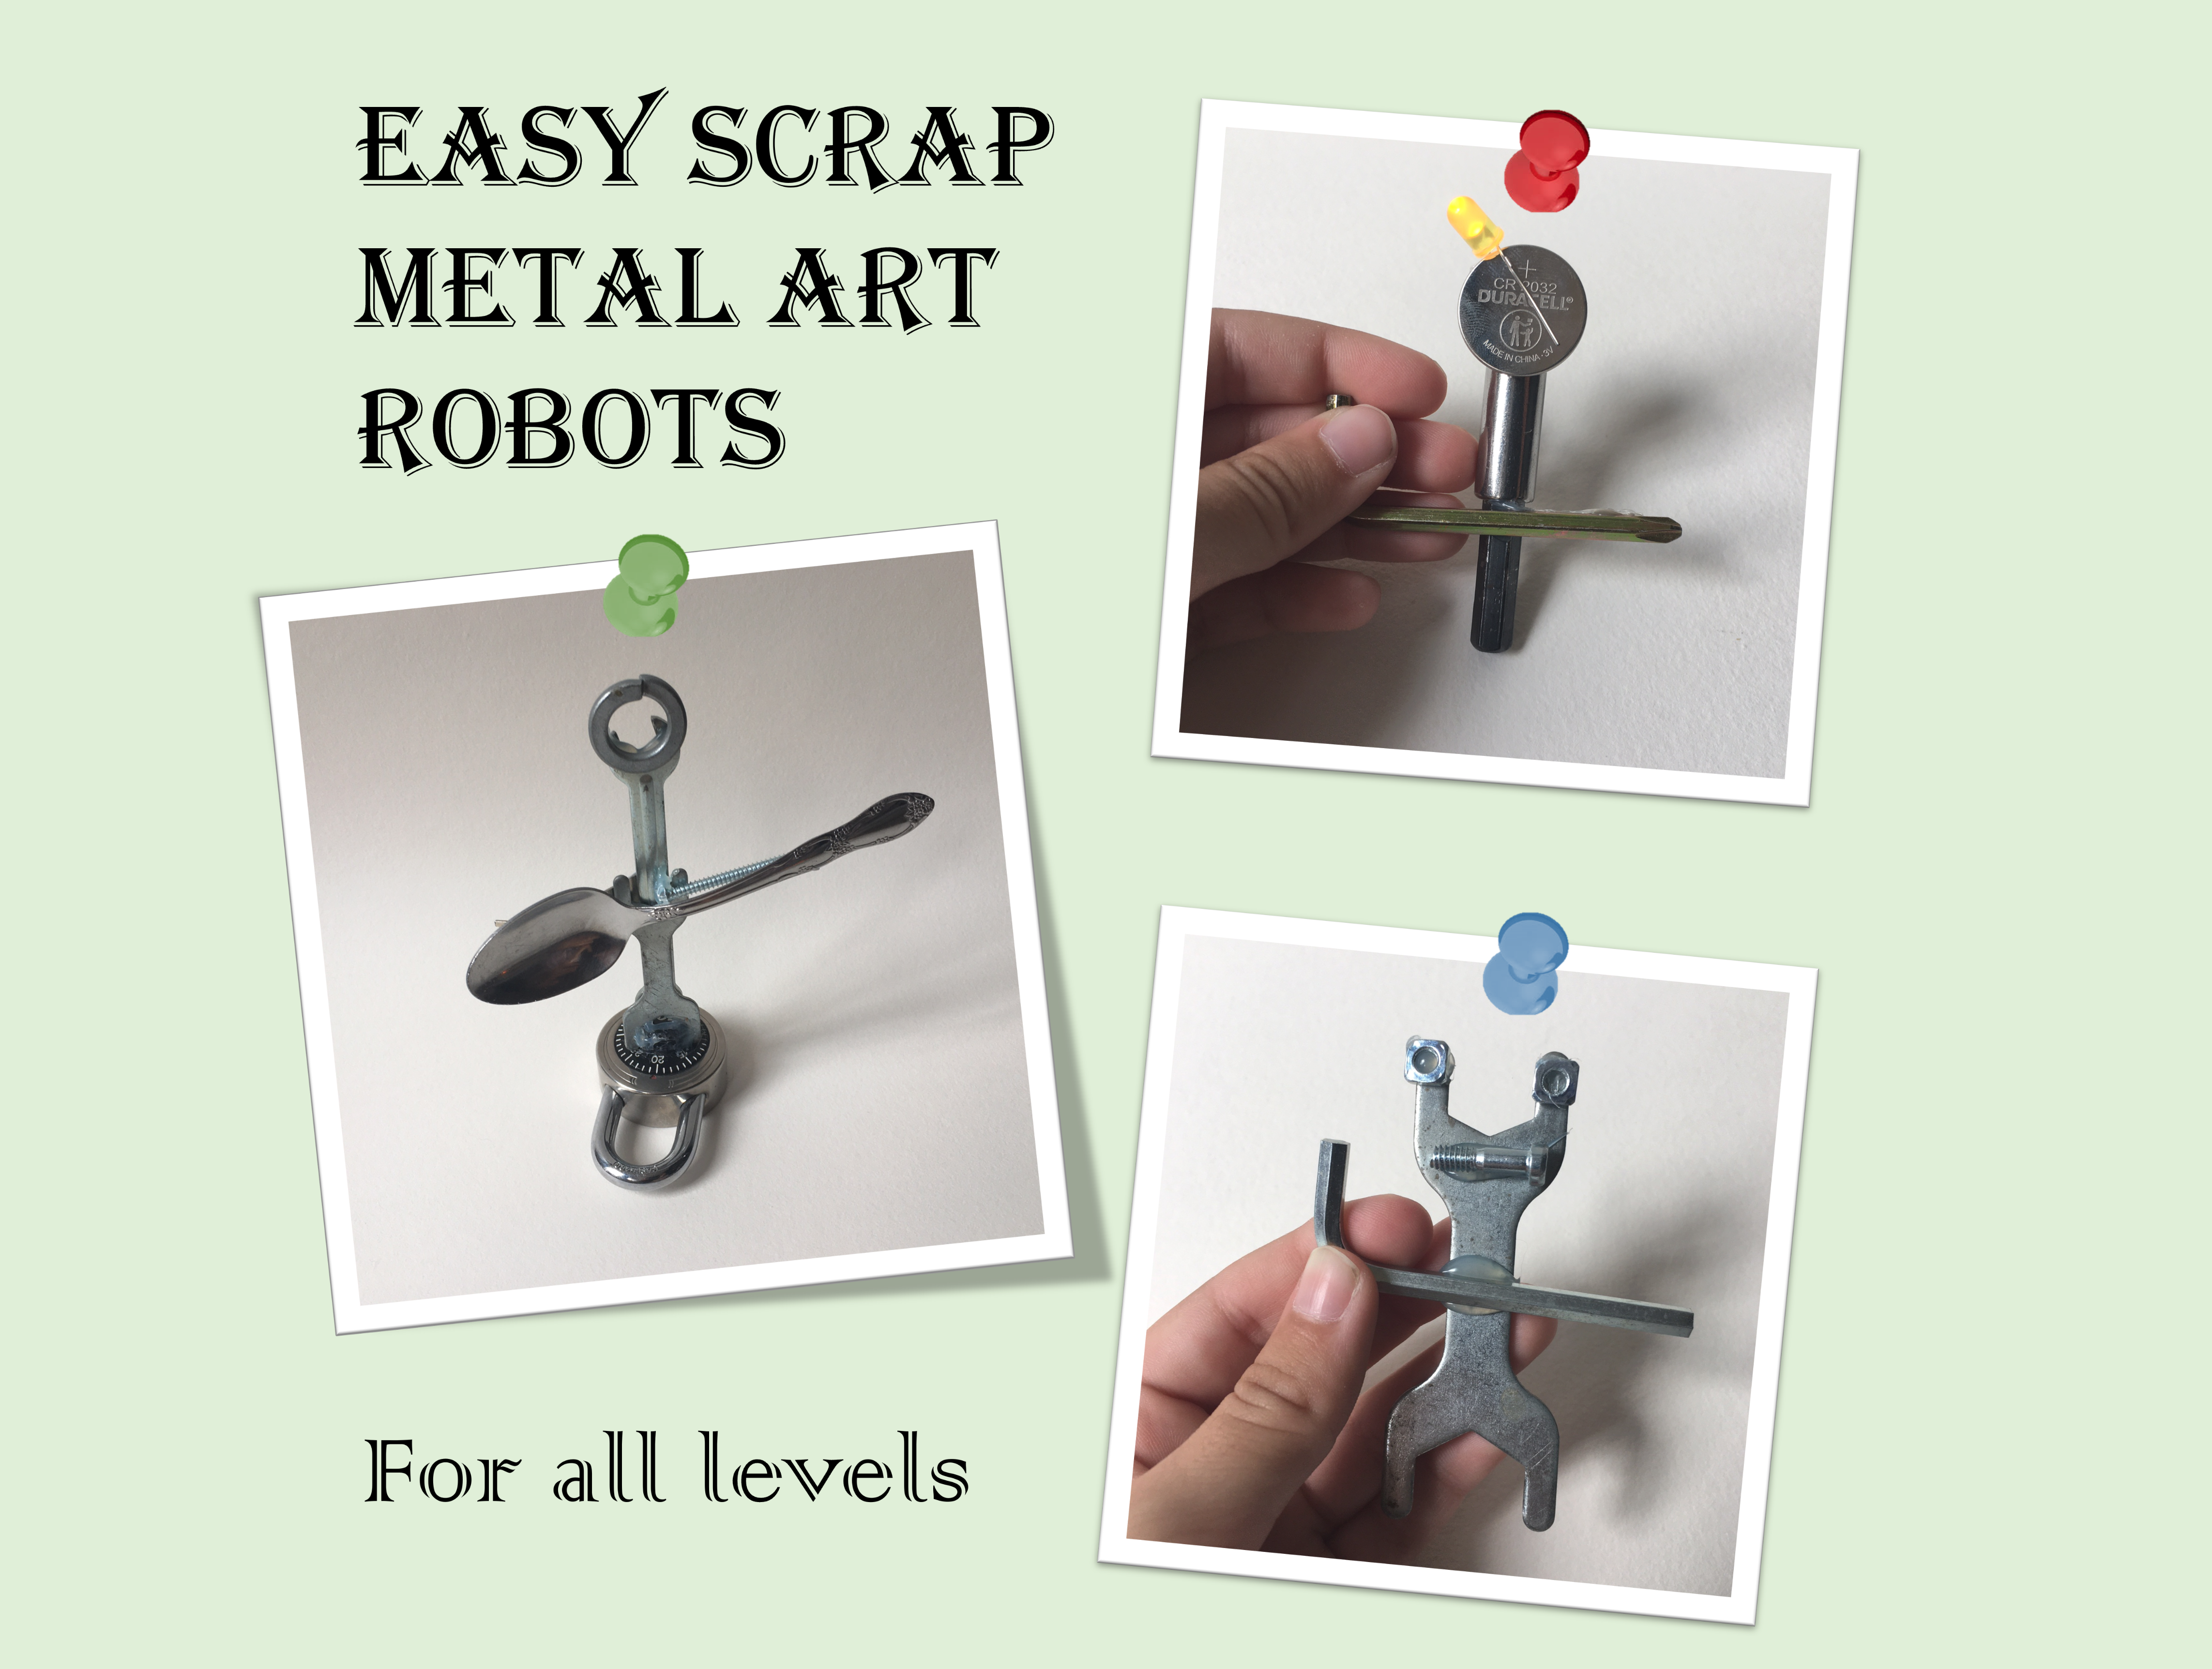 How to Make 3 Easy Scrap Metal Art Projects With Hot Glue